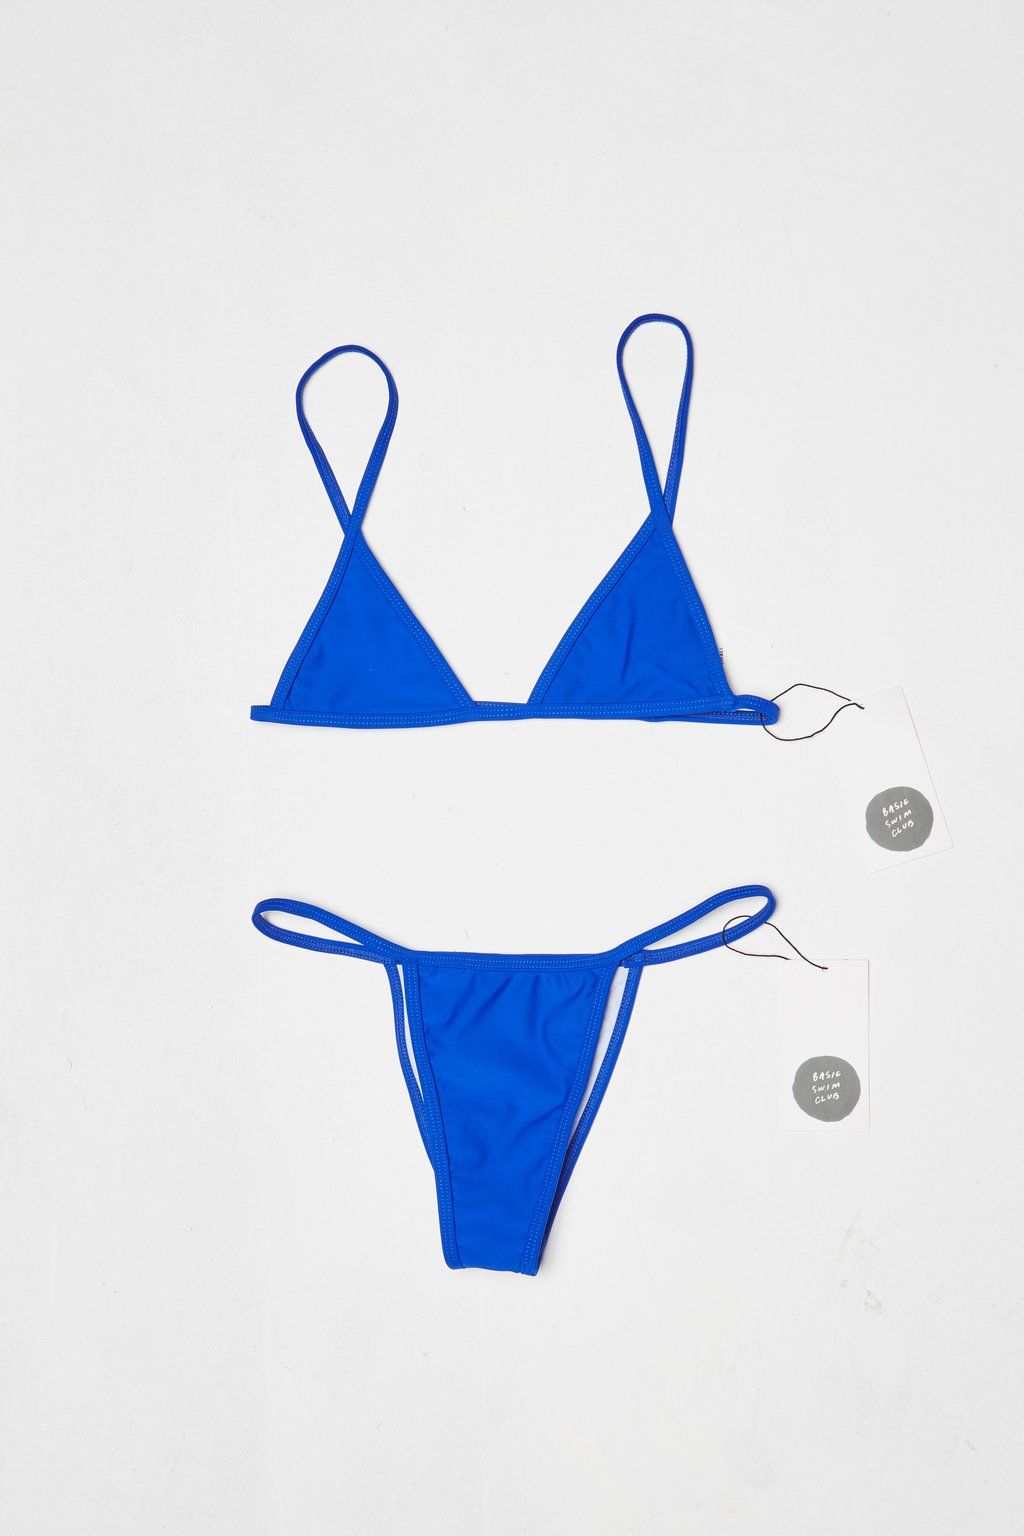 the best swimsuits for avoiding tan lines